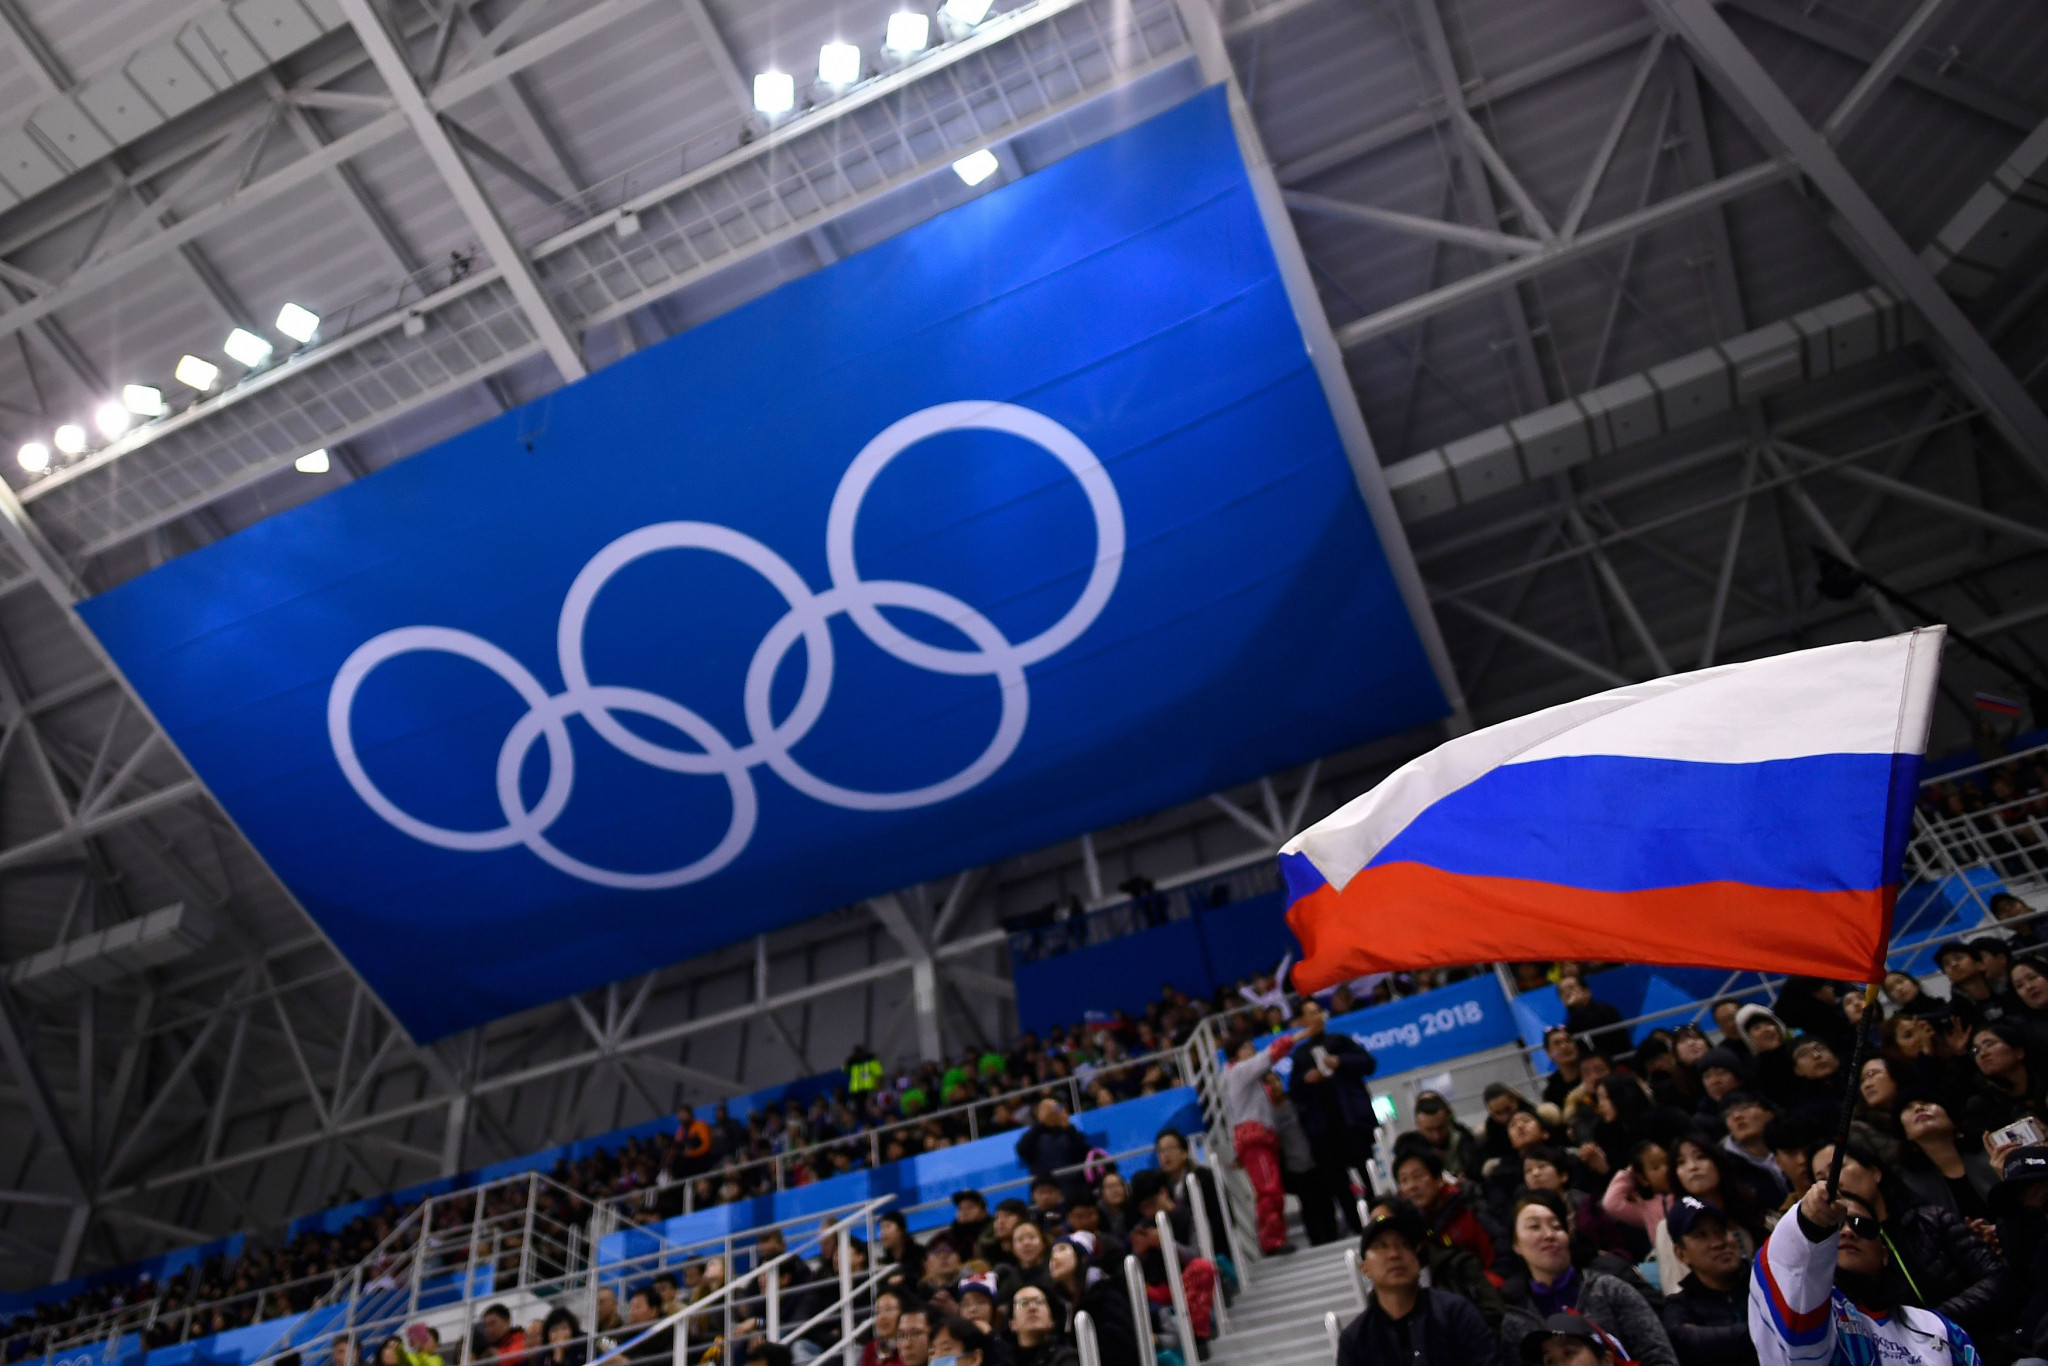 Dozens of Russian National Federations are planning appeals to the Court of Arbitration for Sport against the ban of its athletes from international events ©Getty Images